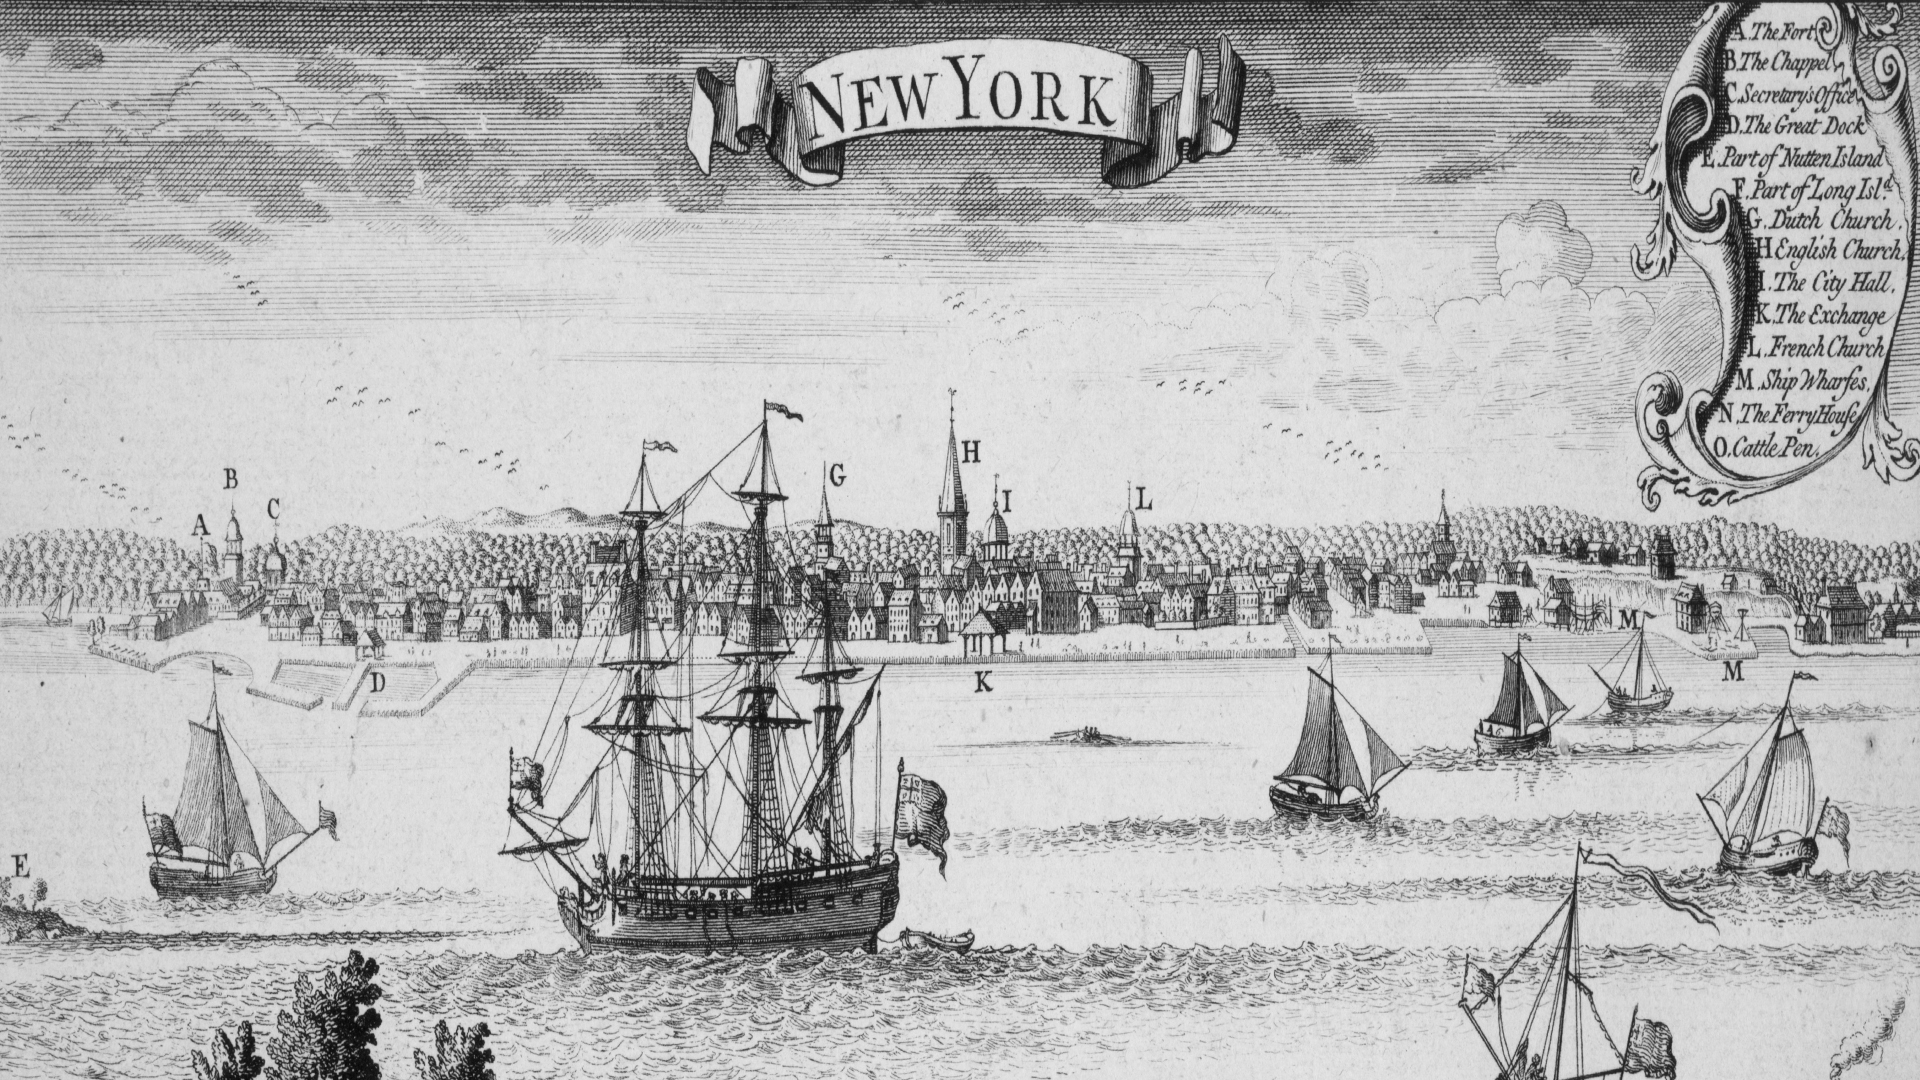 New York - E1 - The Country and the City (1609-1825)